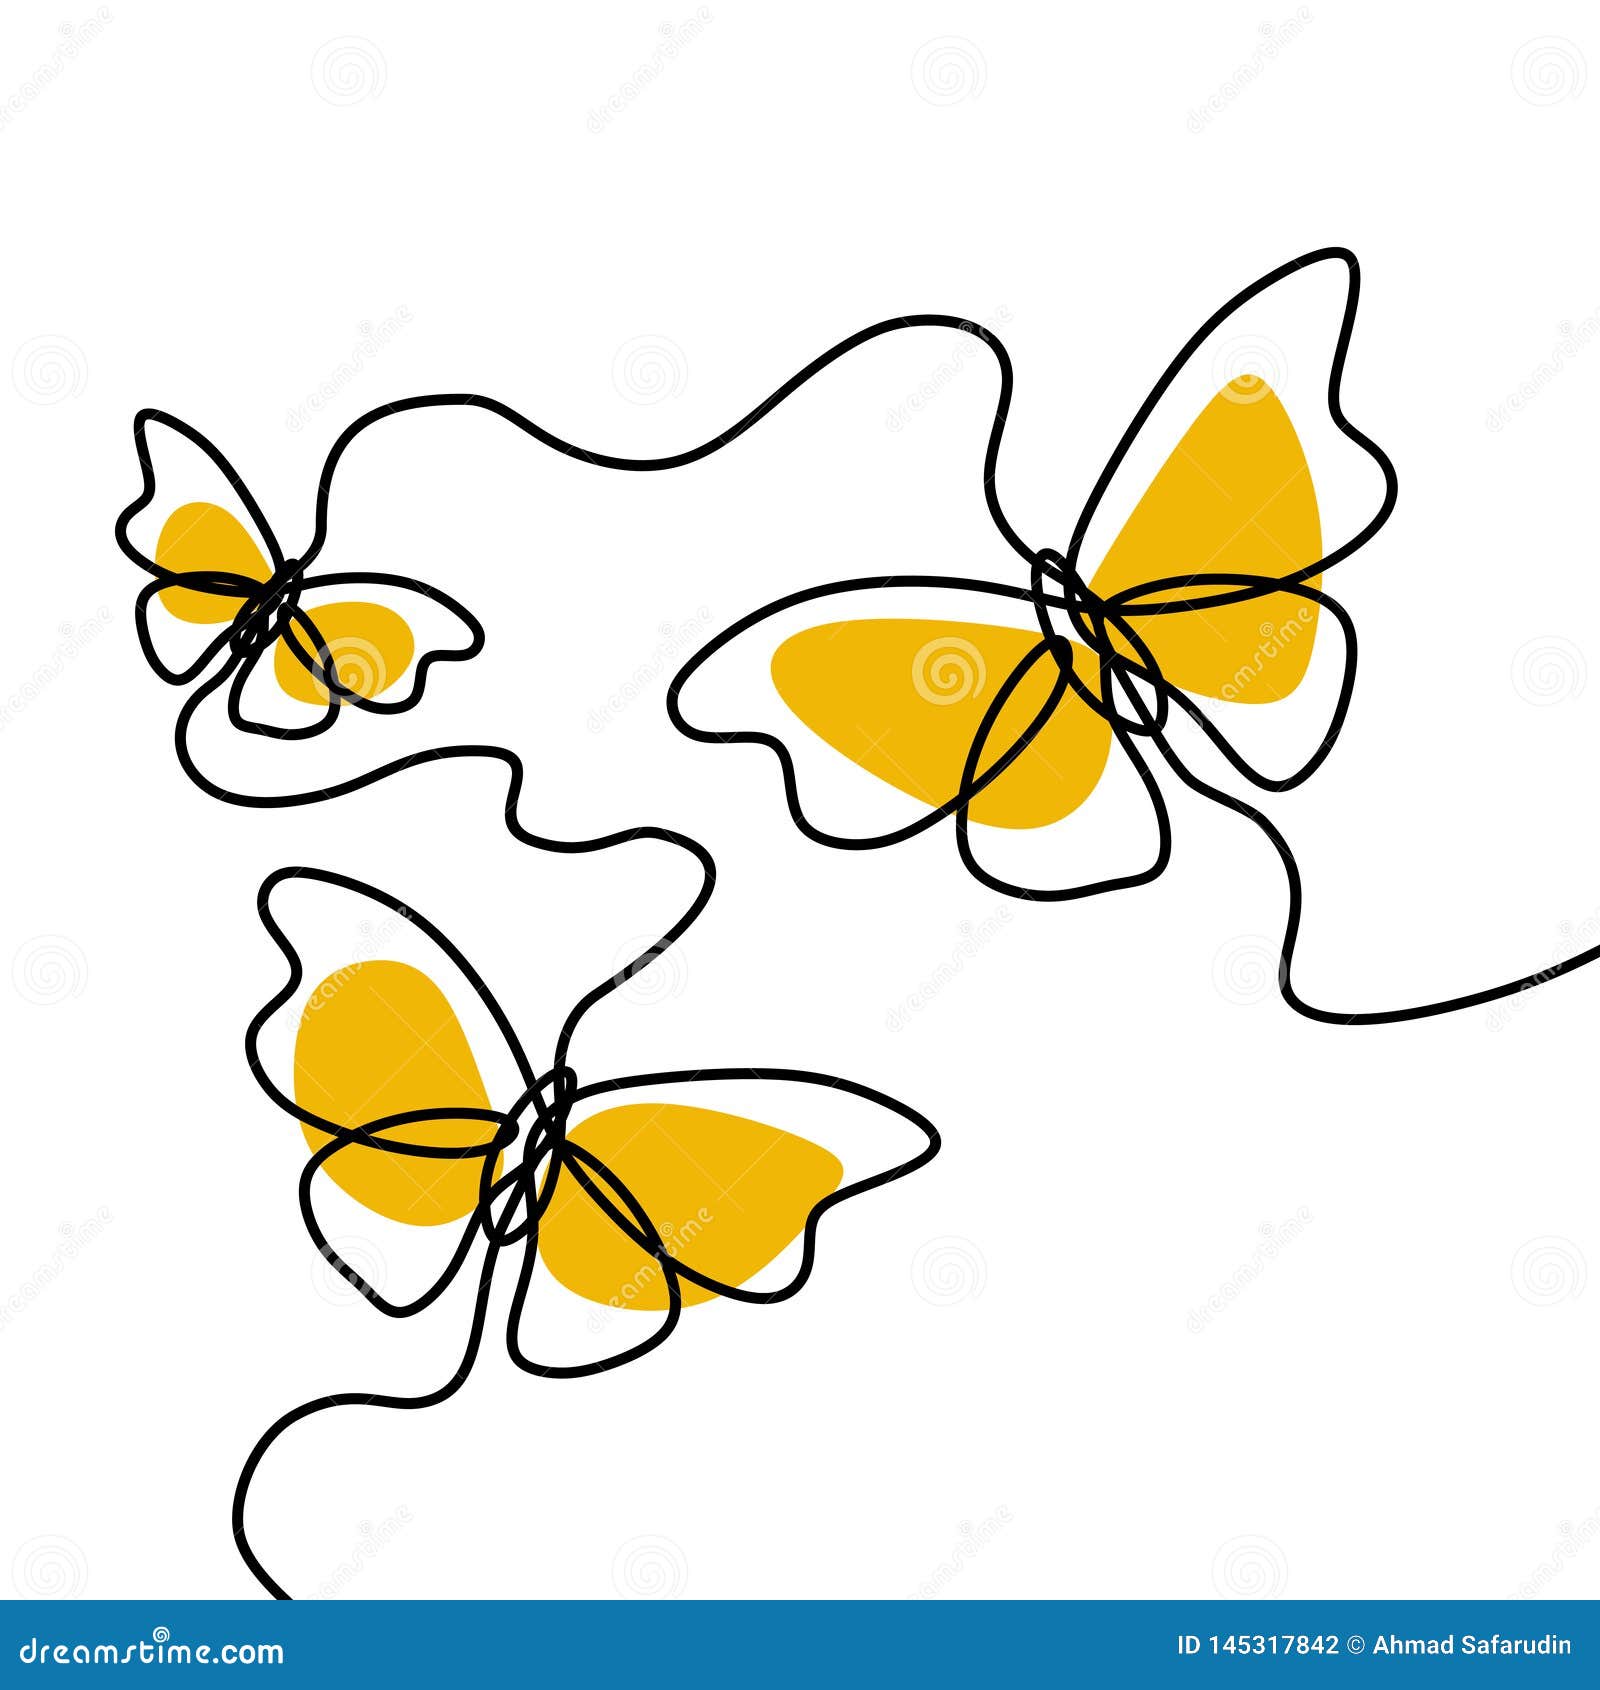 Simple Butterfly Decorative Continuous Line Drawing Vector